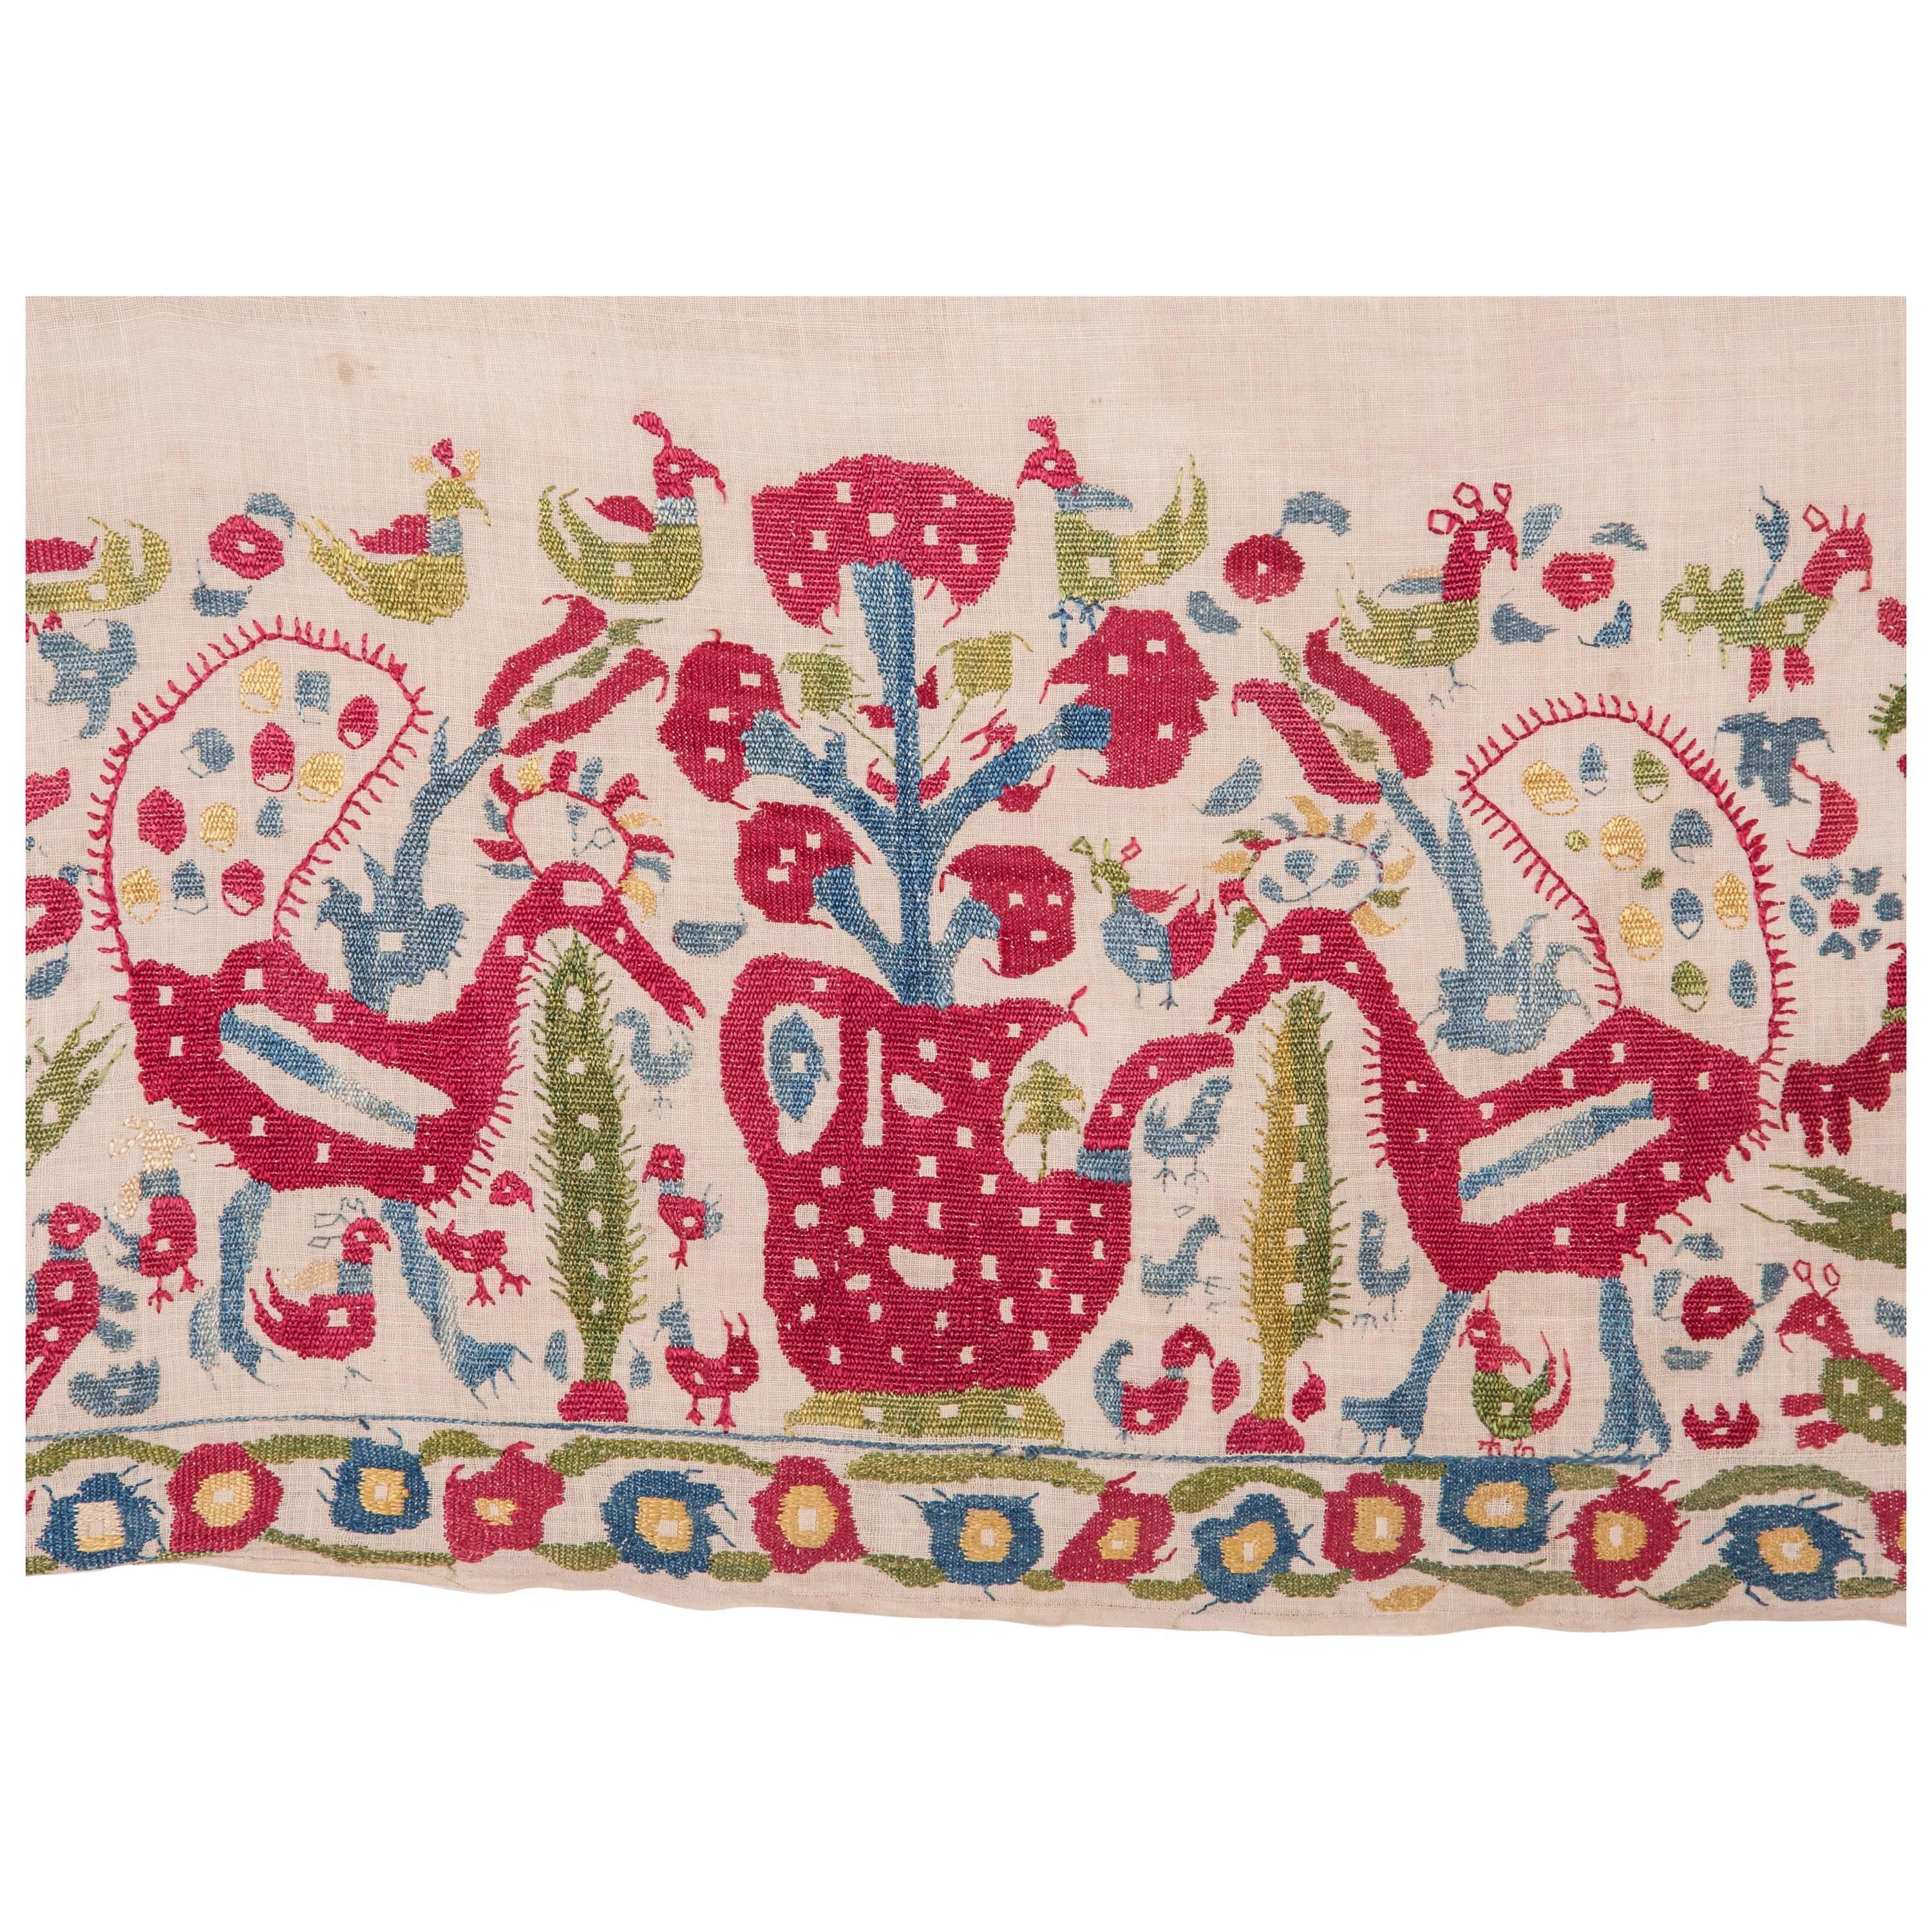 18th Century Embroidered Fragment from Epirus, Greece